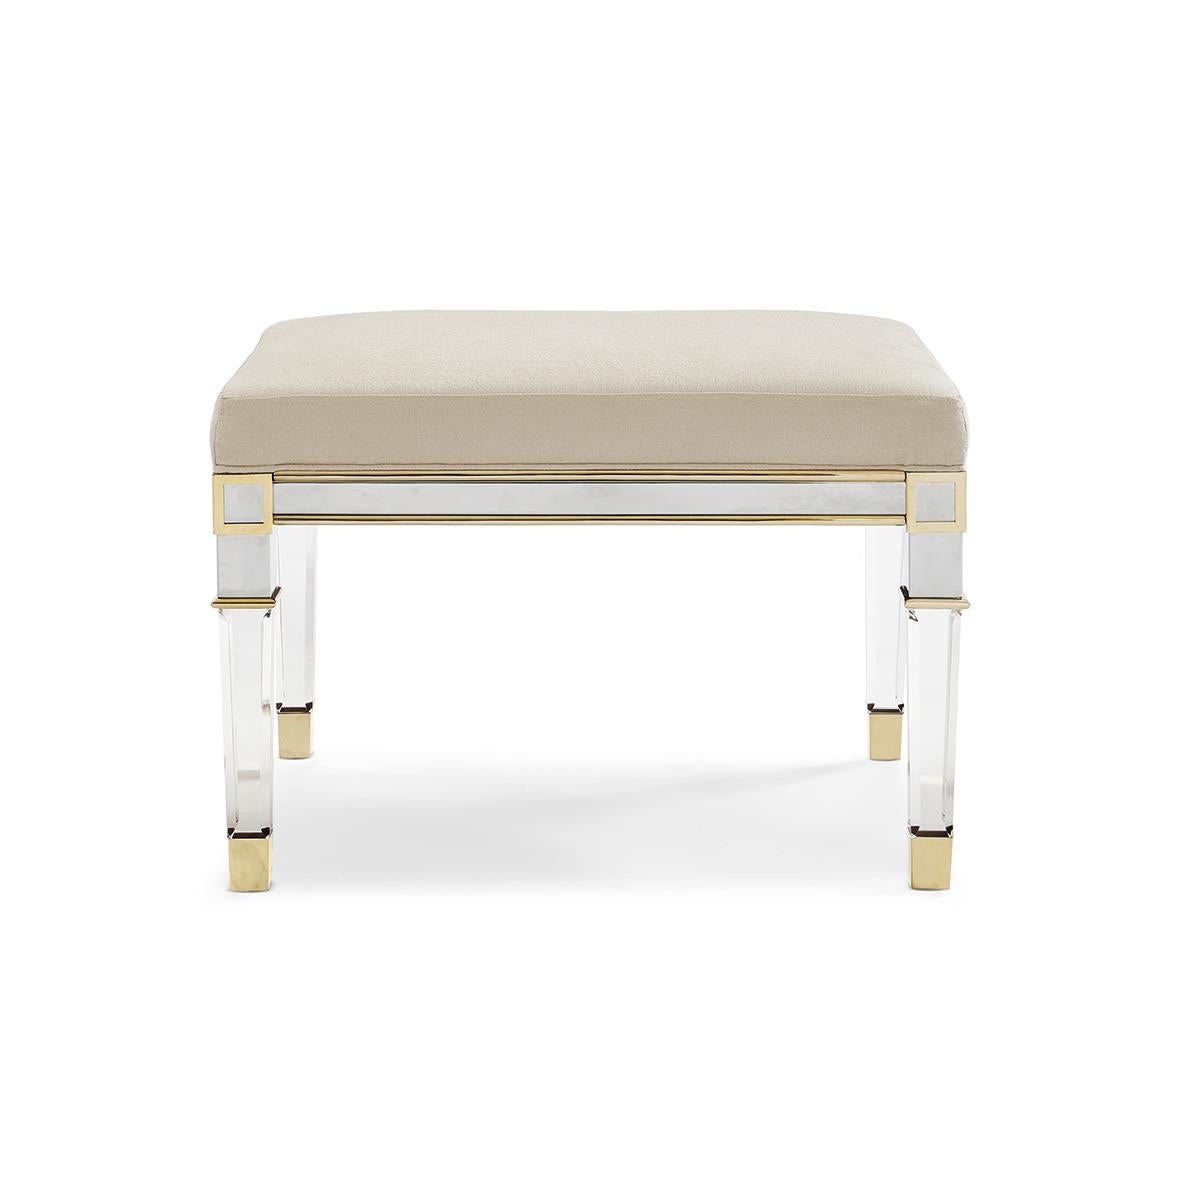 Inspired by a 19th-century Italian Empire design, nickel, gold bullion and acrylic merge in this petite bench with enormous style. The bench frame and tops of the Italian square tapered legs are finished in polished Nickel framed in Gold